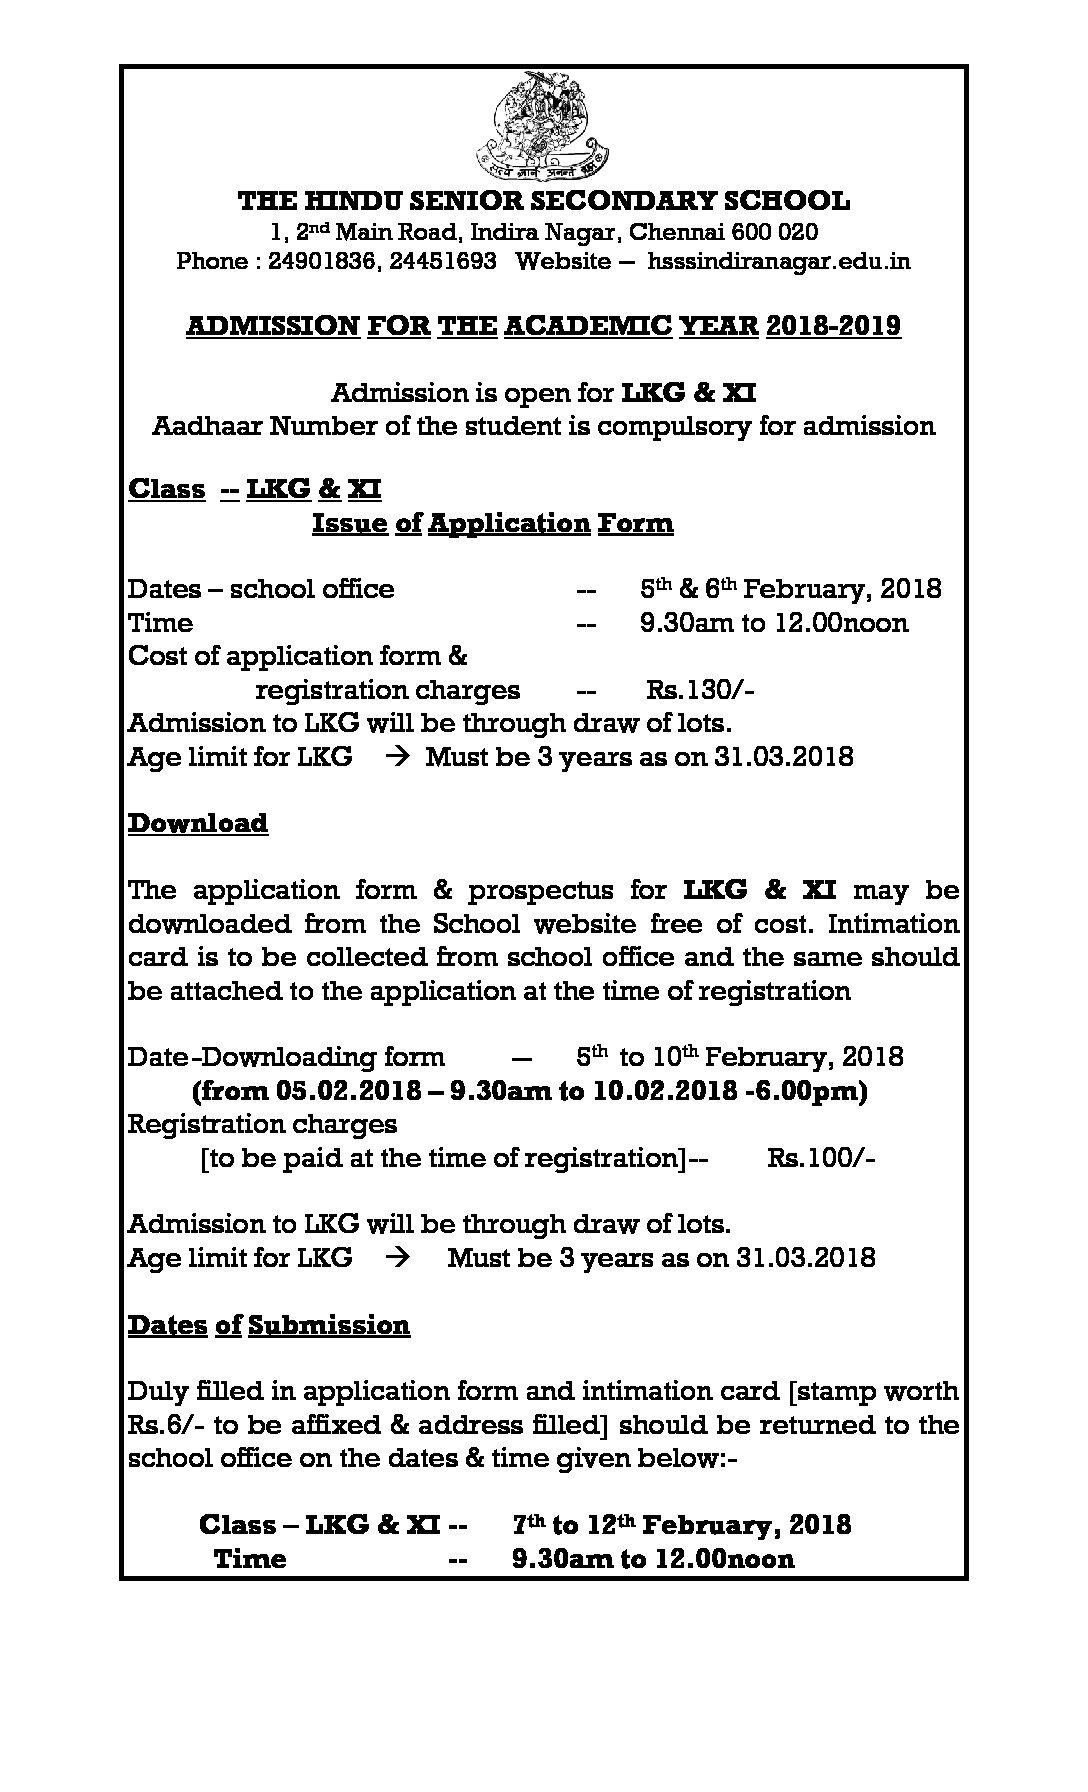 Admission for the Academic year 2018-19